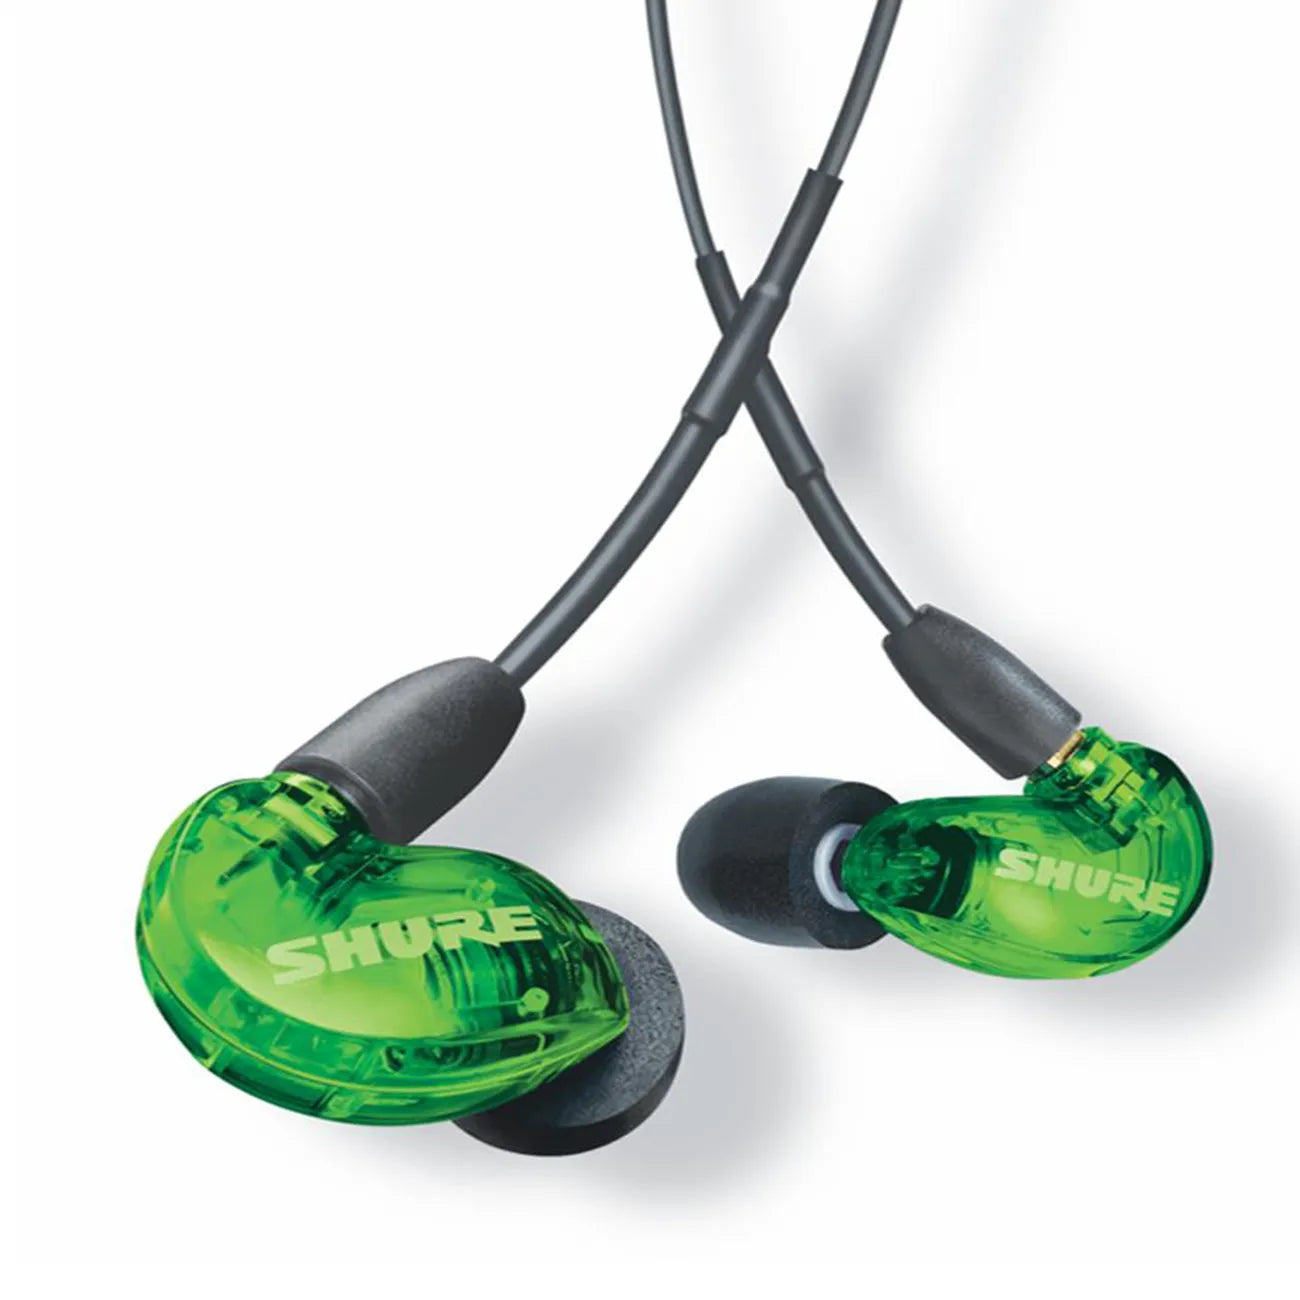 Shure SE215 Sound Isolating Earphones  - Limited Edition Green